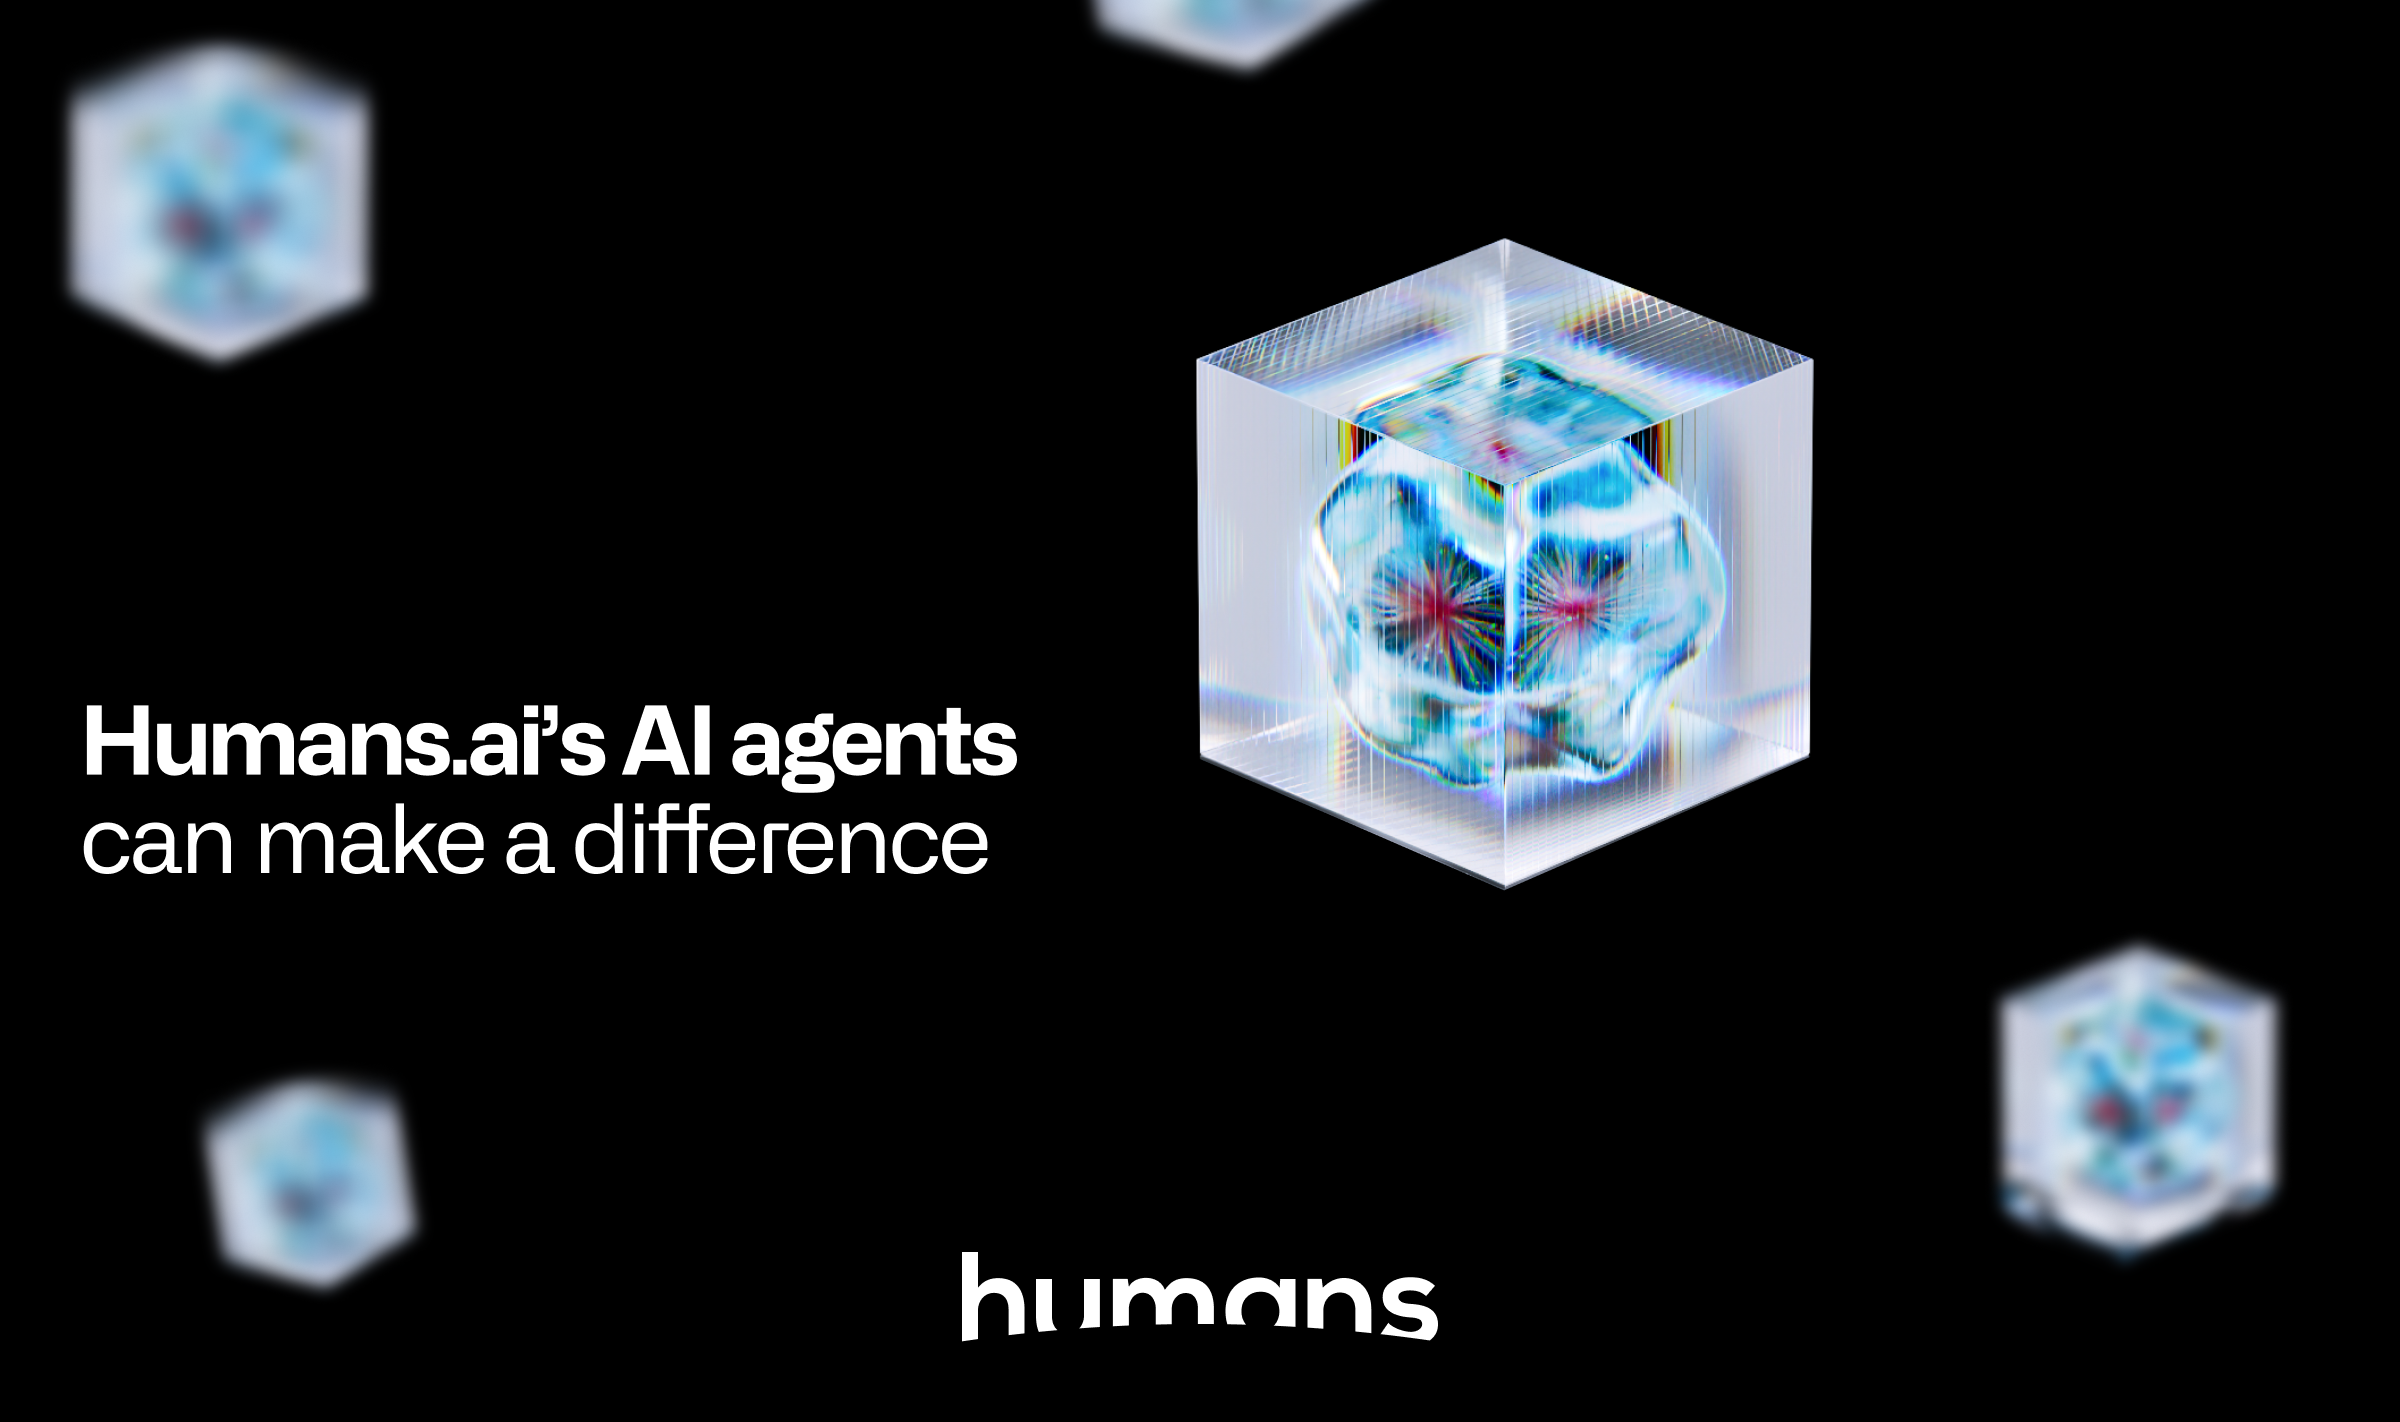 The diverse use cases of Humans.ai’s AI Agents